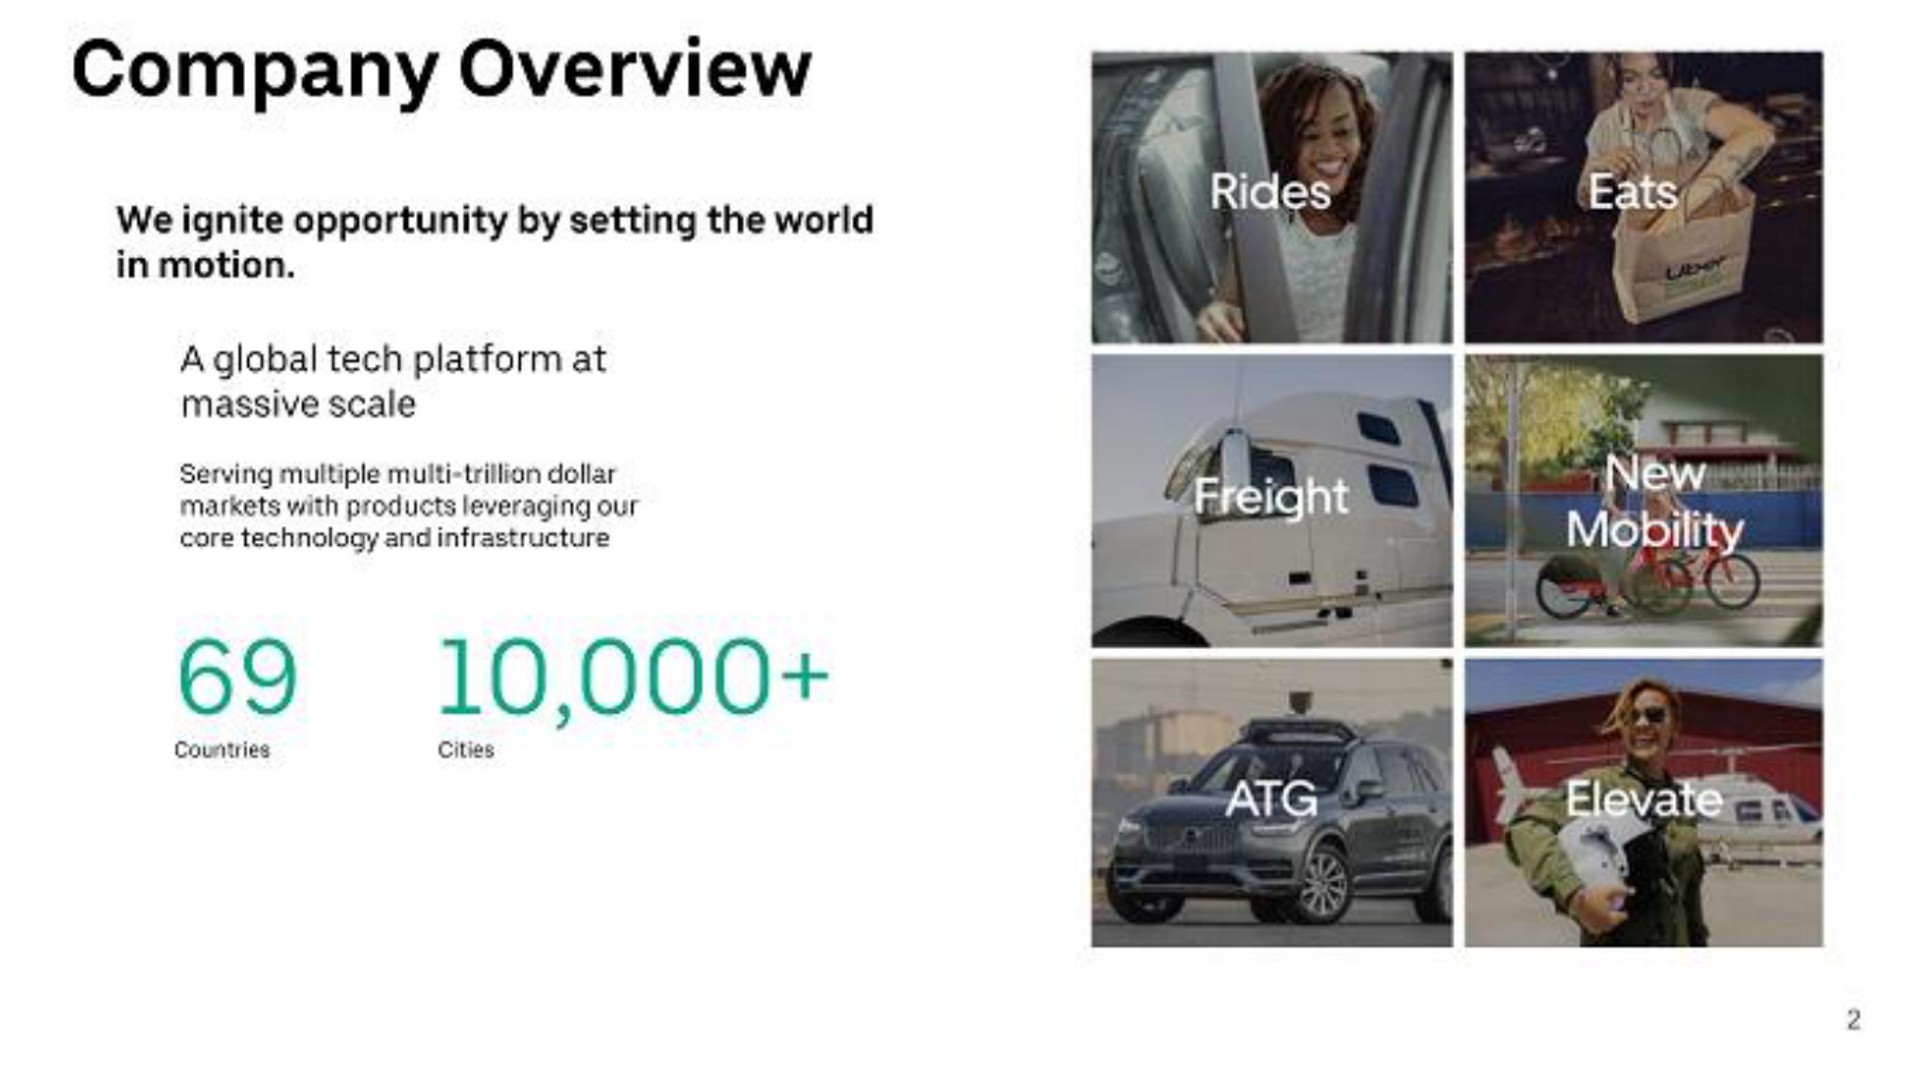 company overview we ignite opportunity by setting the world a global tech platform at massive scale | Uber